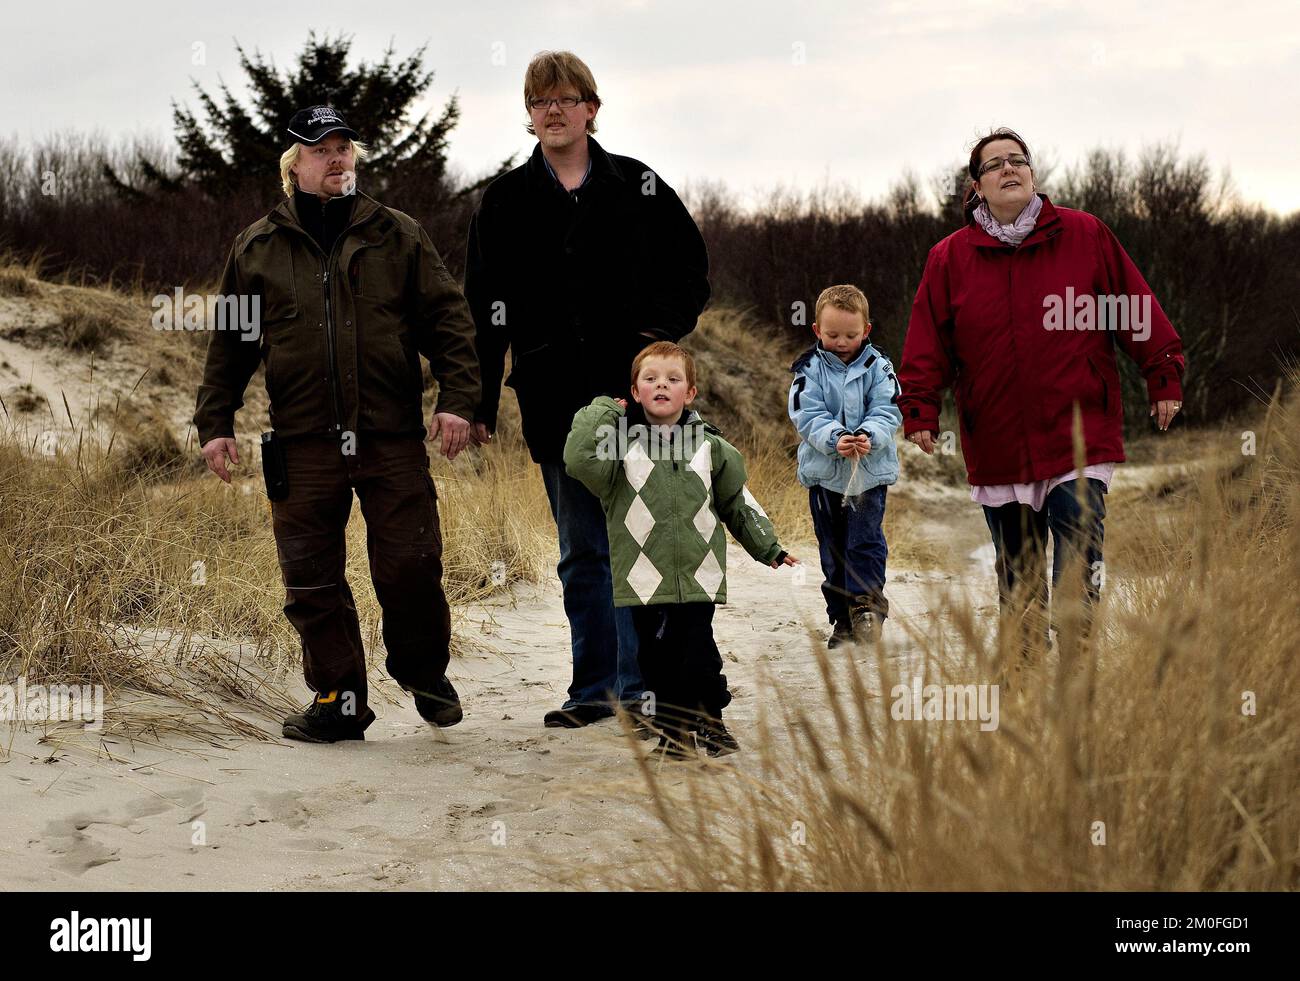 Michael Nielsen (second left) and his son Marcus (second right) alongside Tommy Kallehauge (left) and son Lucas (centre) with mother Charlotte Hilbrandt (right). Twins Marcus and Lucas, born 48 minutes apart have two different fathers. Mum Charlotte Hilbrandt became pregnant by ex-husband Michael and new boyfriend Tommy when she slept with both men within 48 hours. Stock Photo